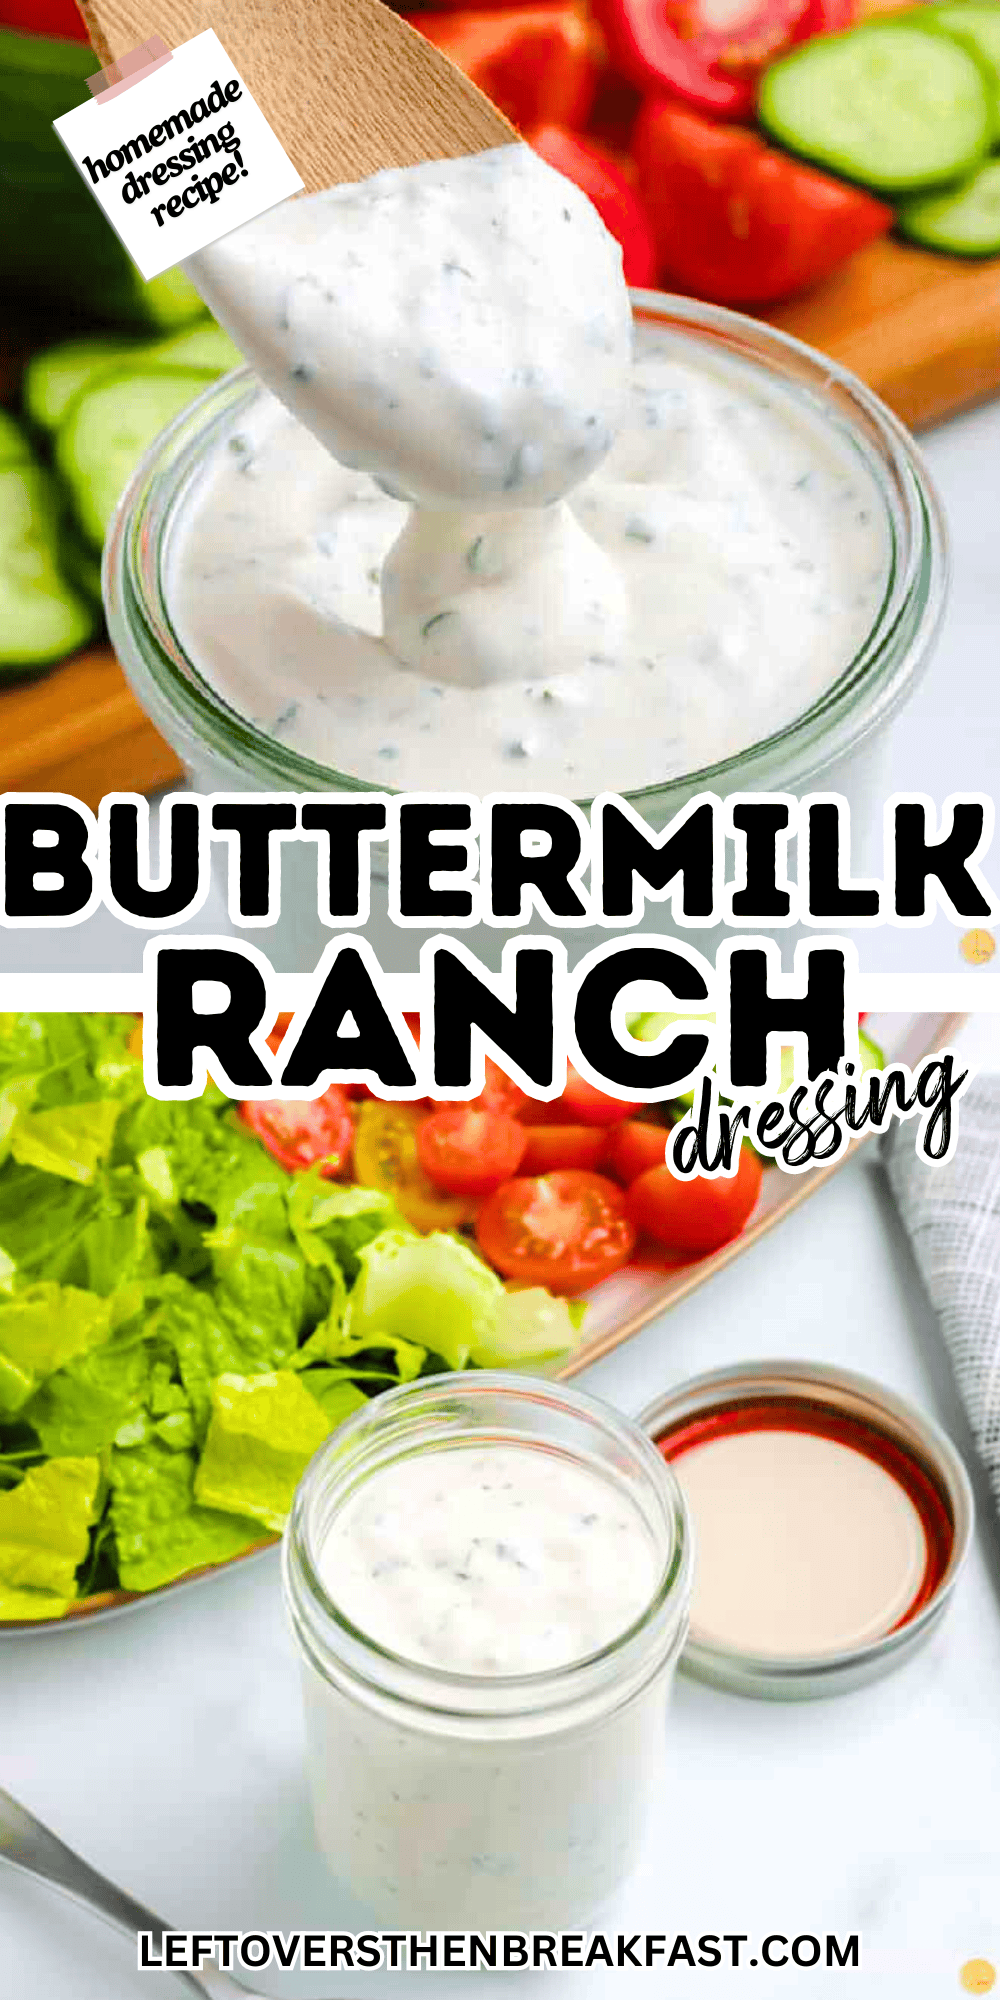 buttermilk ranch dressing picture collage